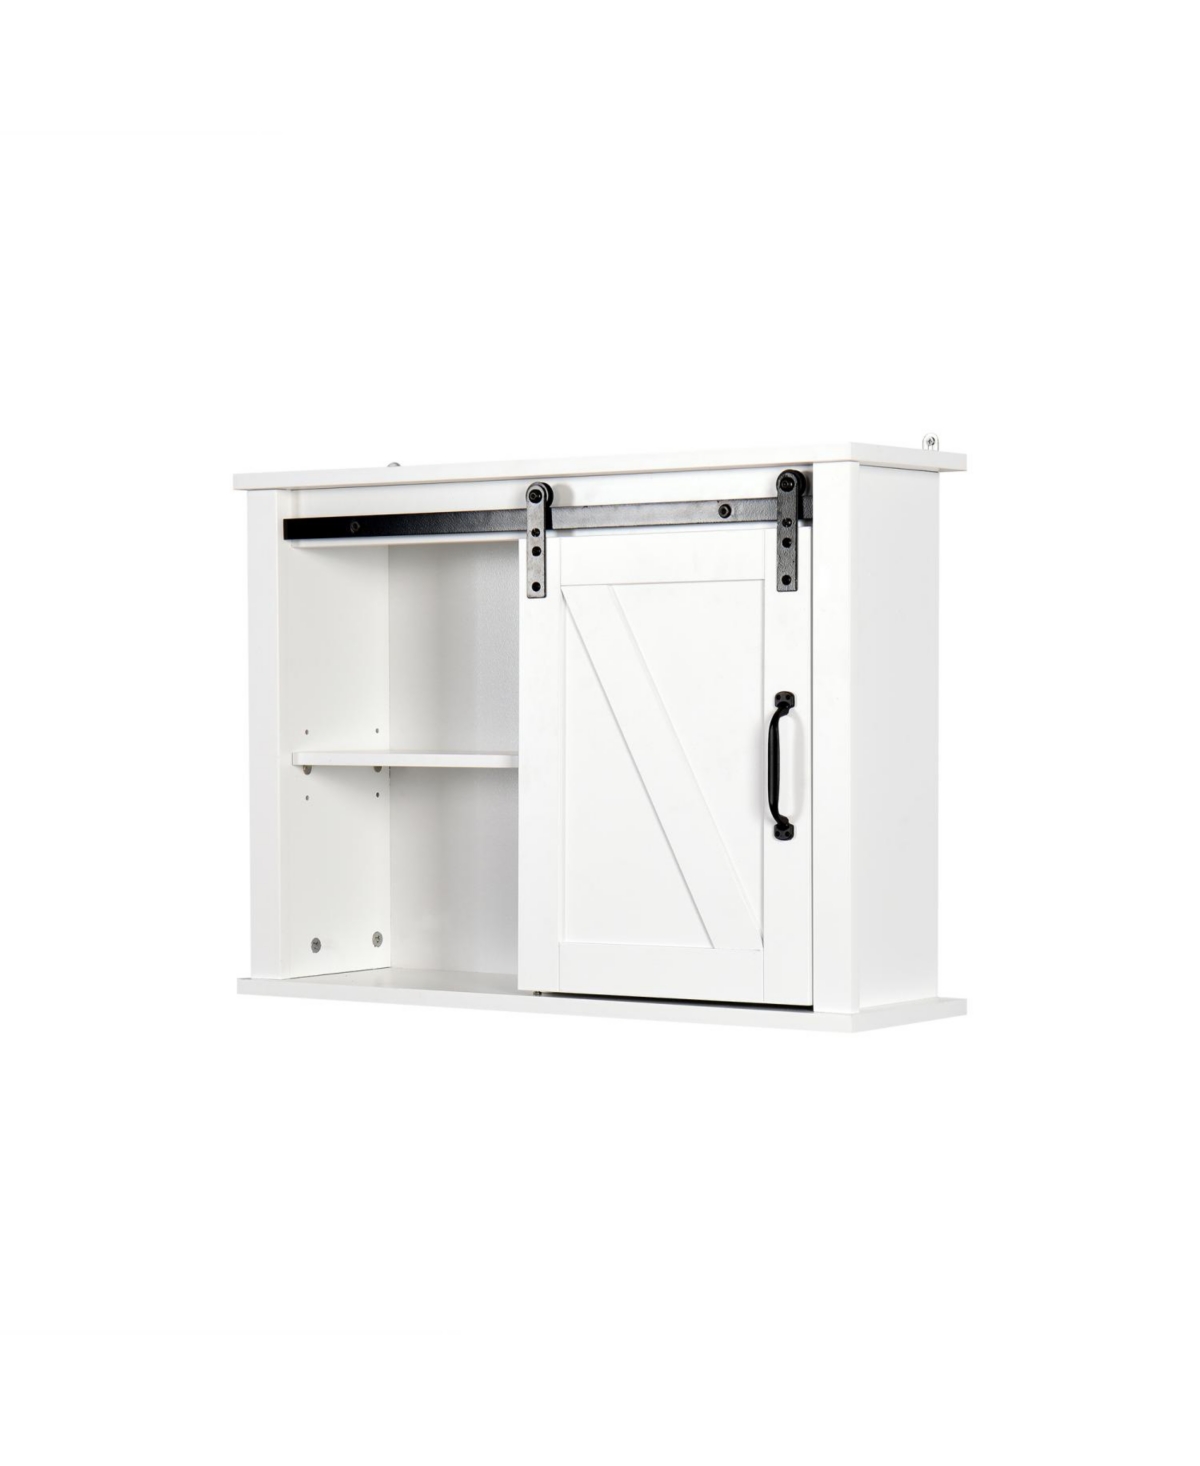 Bathroom Wall Cabinet With 2 Adjustable Shelves Wooden Storage Cabinet With A Barn Door - White